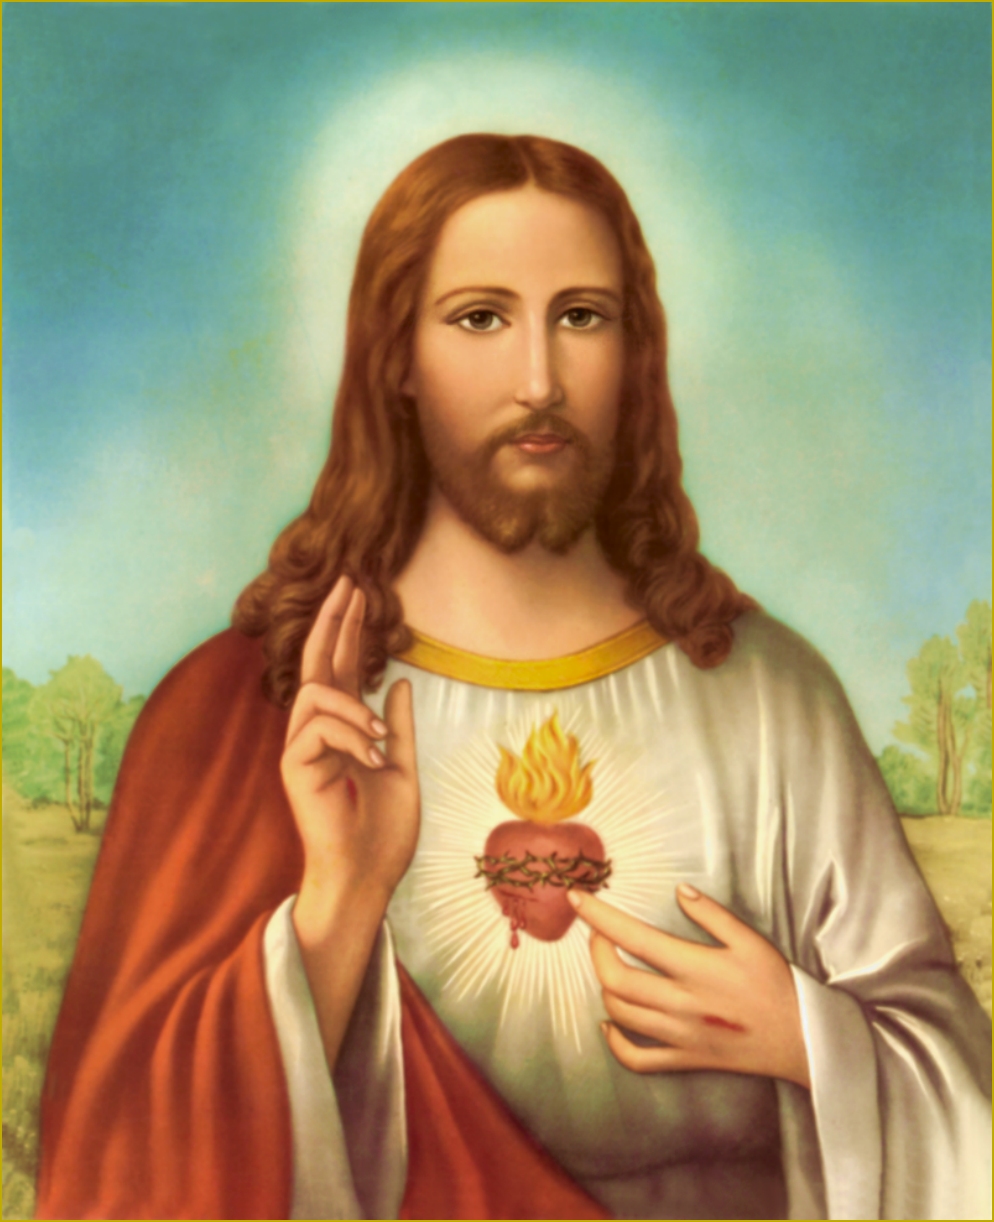 The Sacred Heart of Jesus burns for you